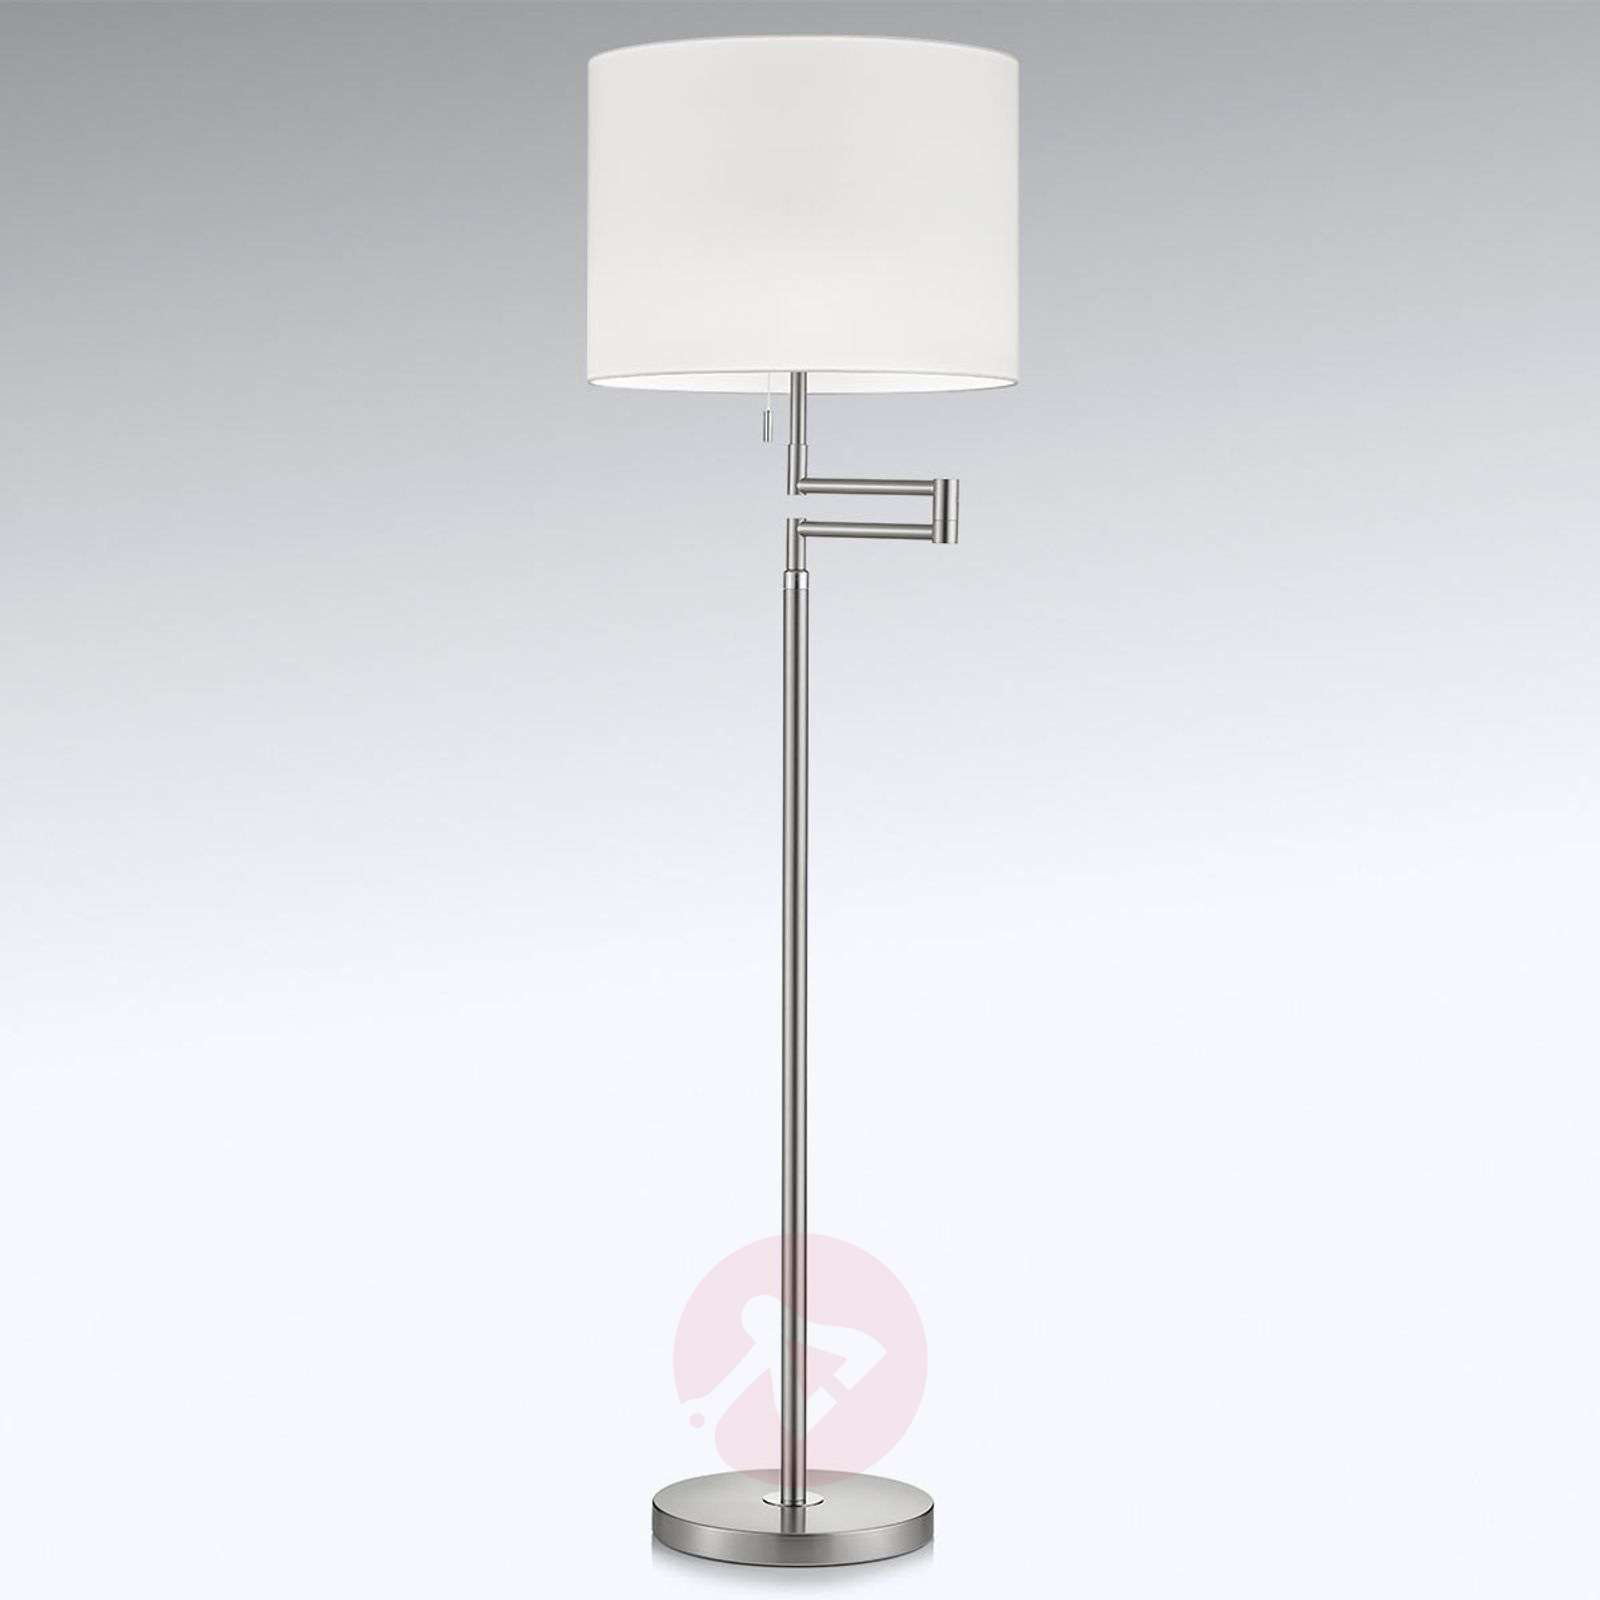 Flexible Led Floor Lamp Lilian Dimmable pertaining to size 1600 X 1600